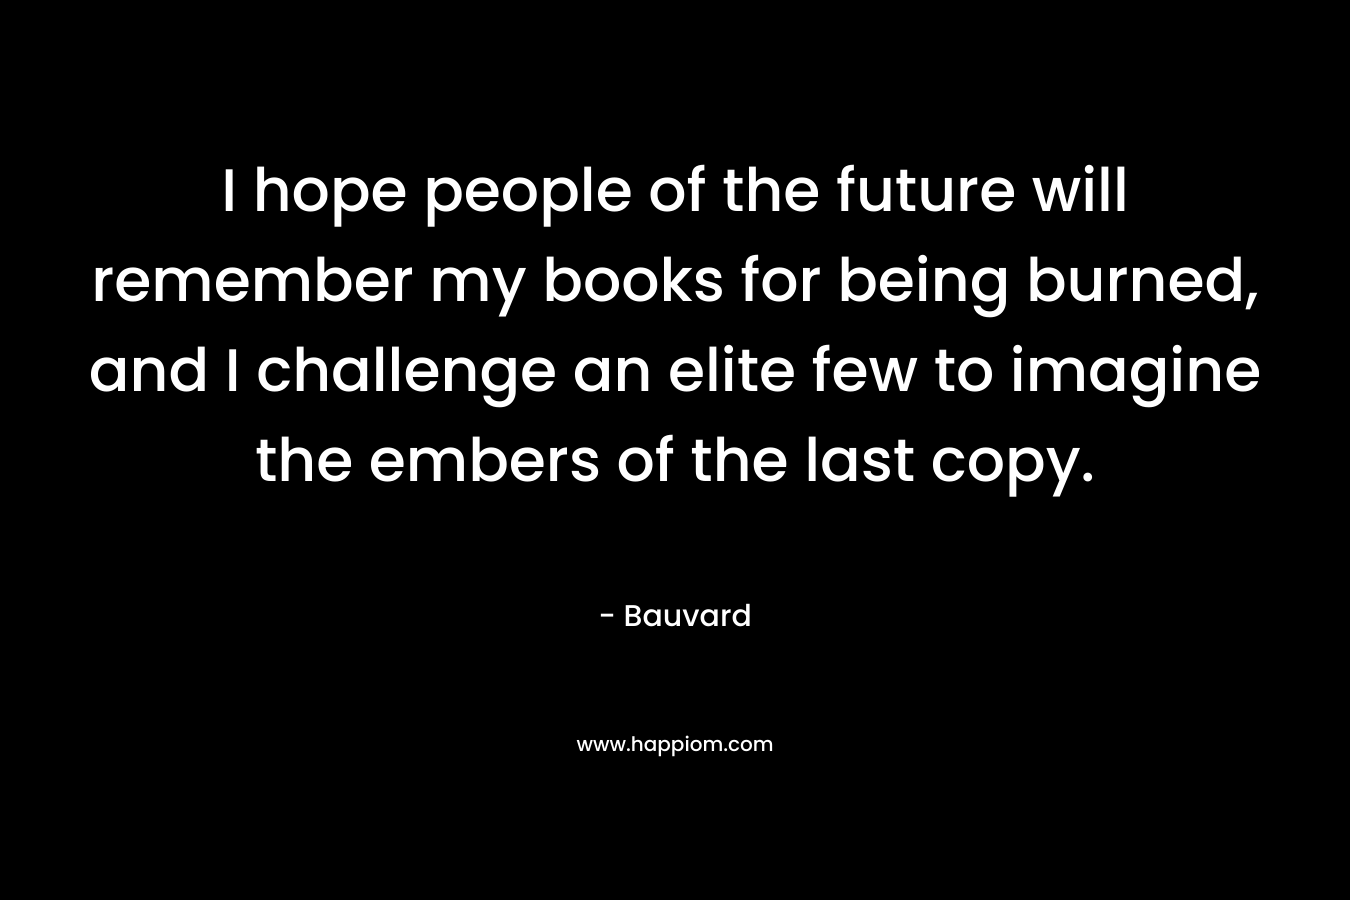 I hope people of the future will remember my books for being burned, and I challenge an elite few to imagine the embers of the last copy.